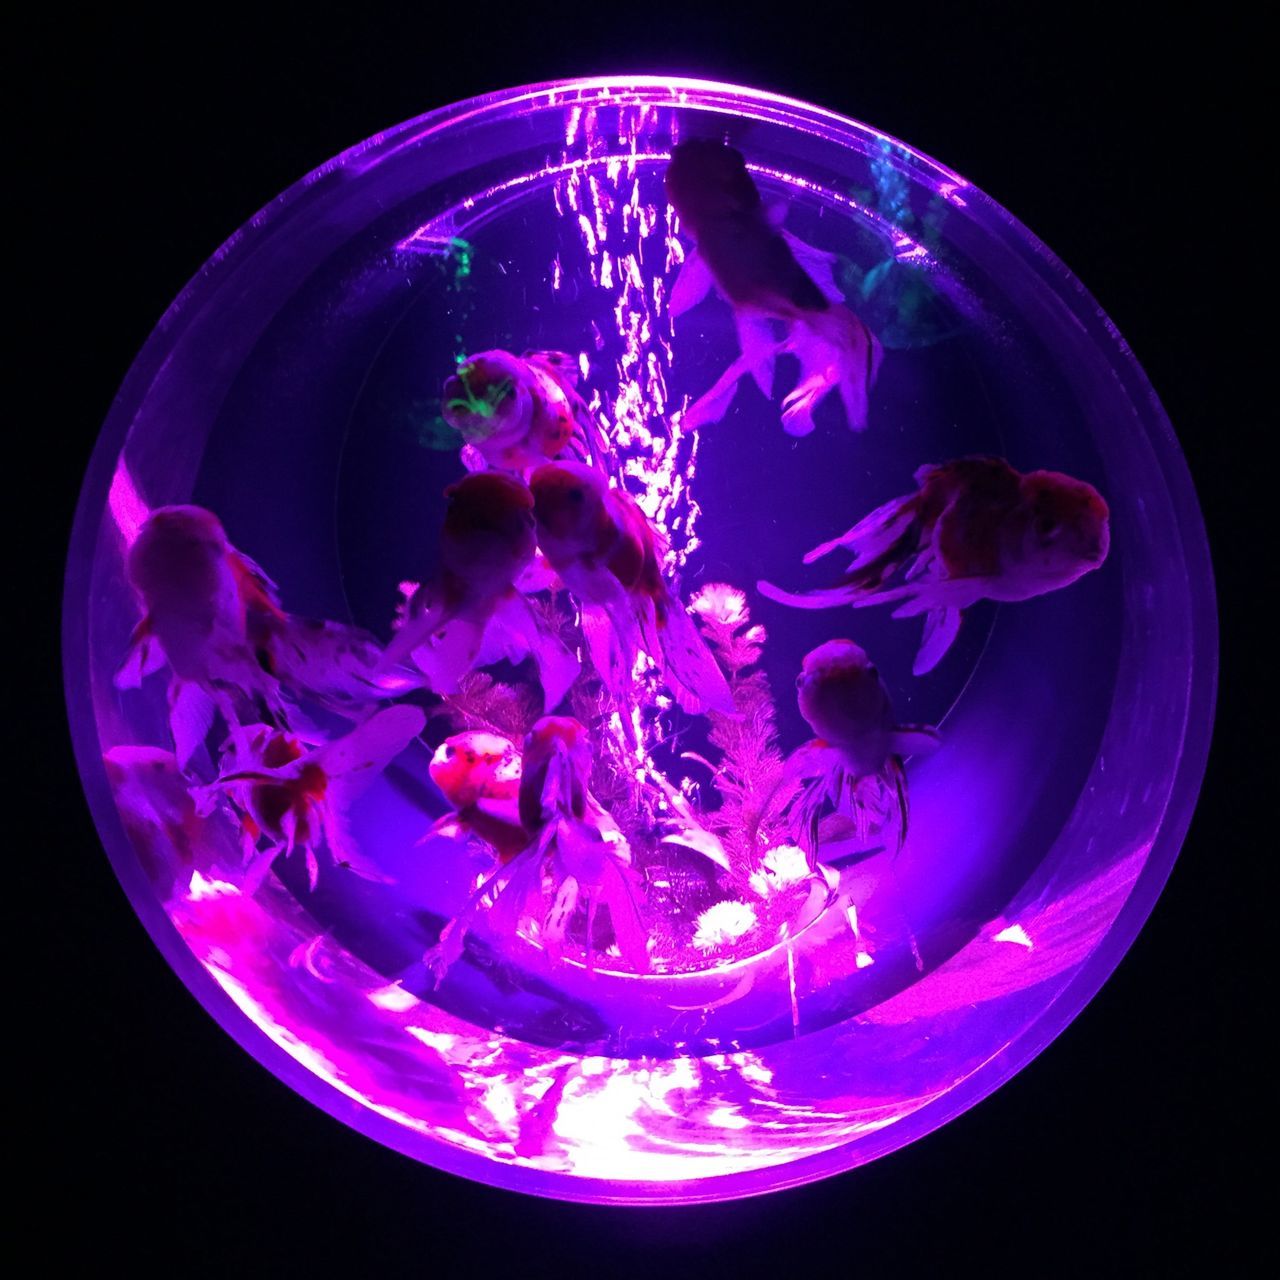 circle, night, multi colored, mid-air, blue, motion, studio shot, close-up, illuminated, glowing, jellyfish, transparent, low angle view, no people, pink color, purple, black background, sky, flying, glass - material